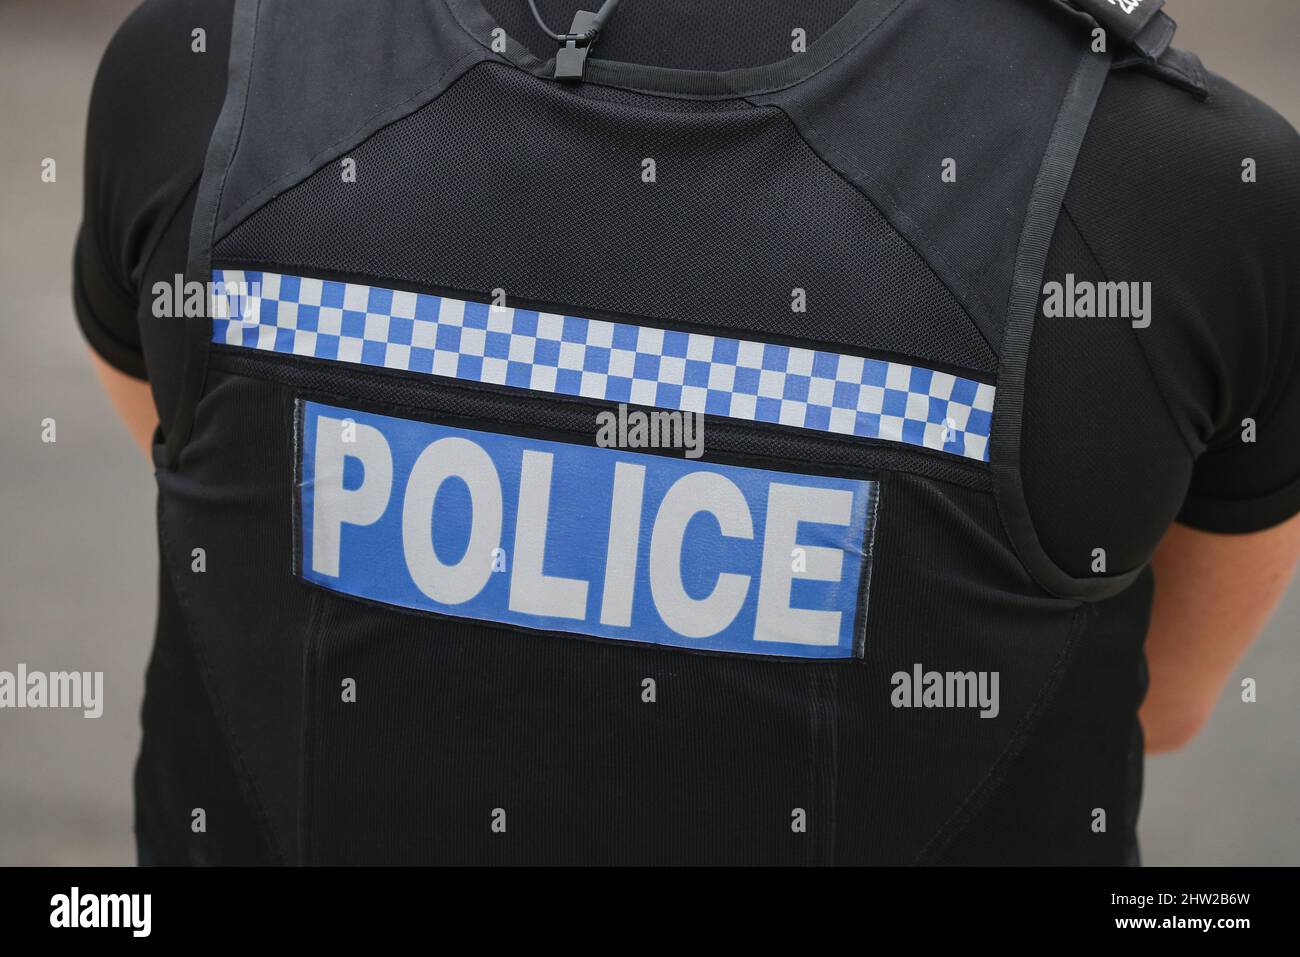 UK police officer on duty pictured from behind. Stock Photo